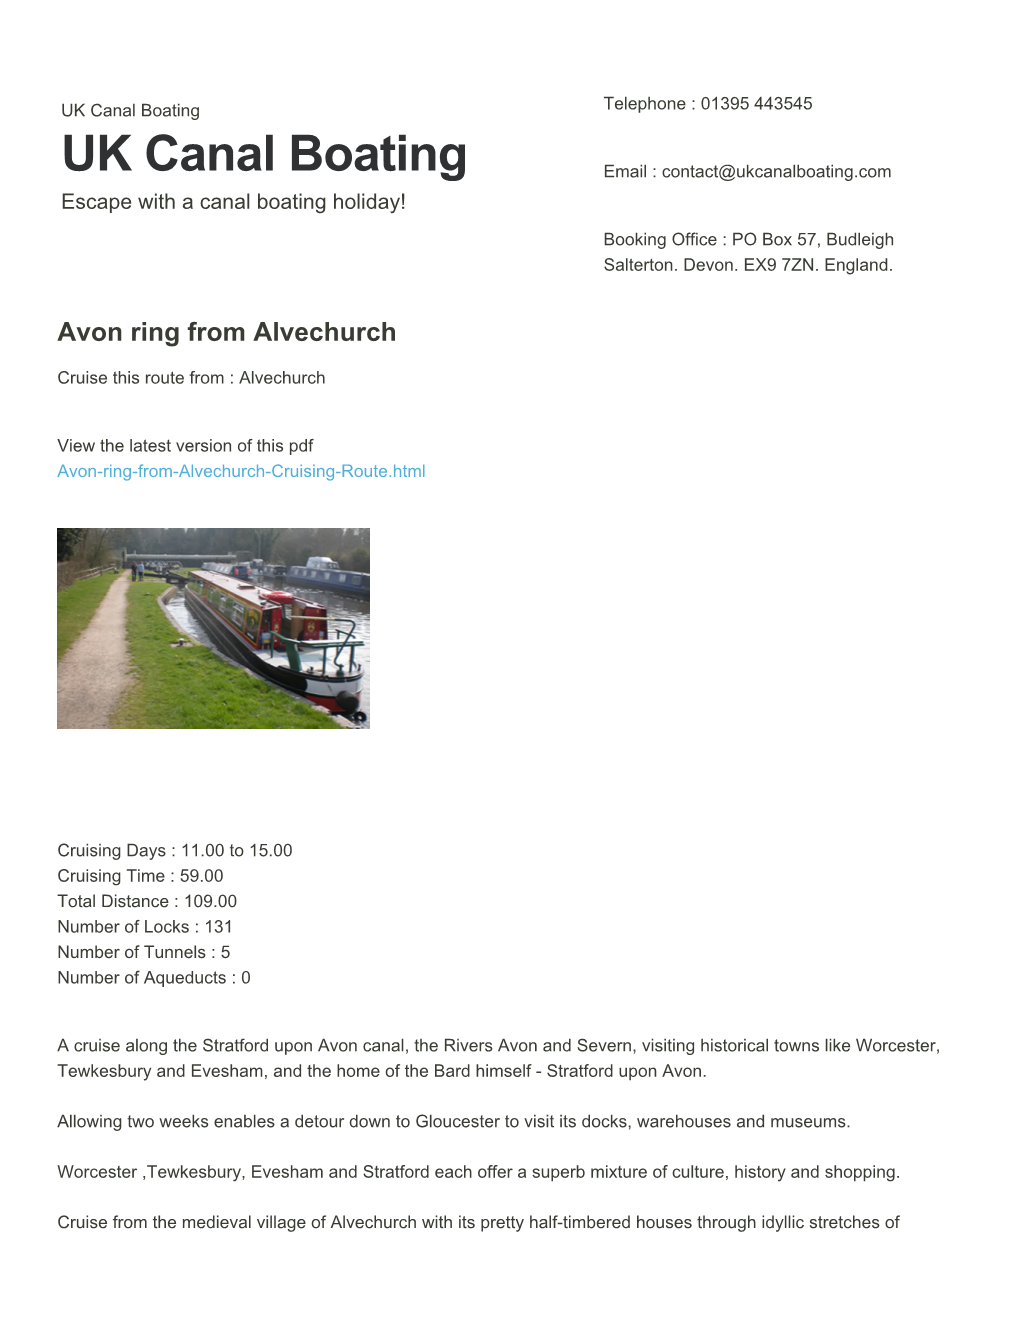 Avon Ring from Alvechurch | UK Canal Boating